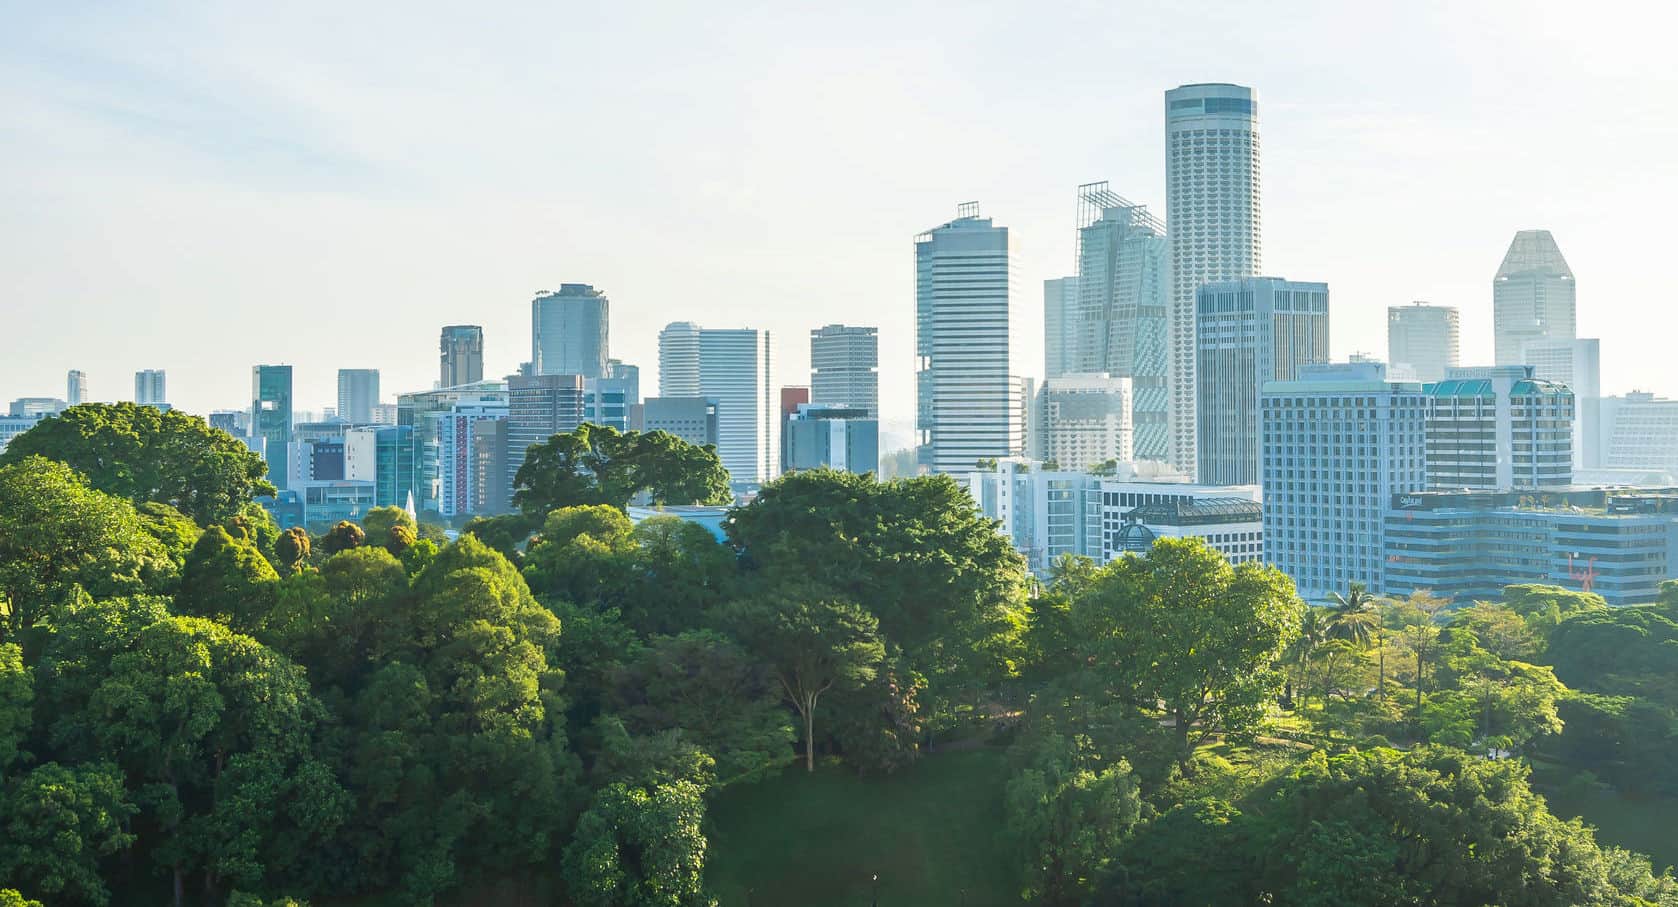 Outline of the Singapore city with trees and greenery in the background